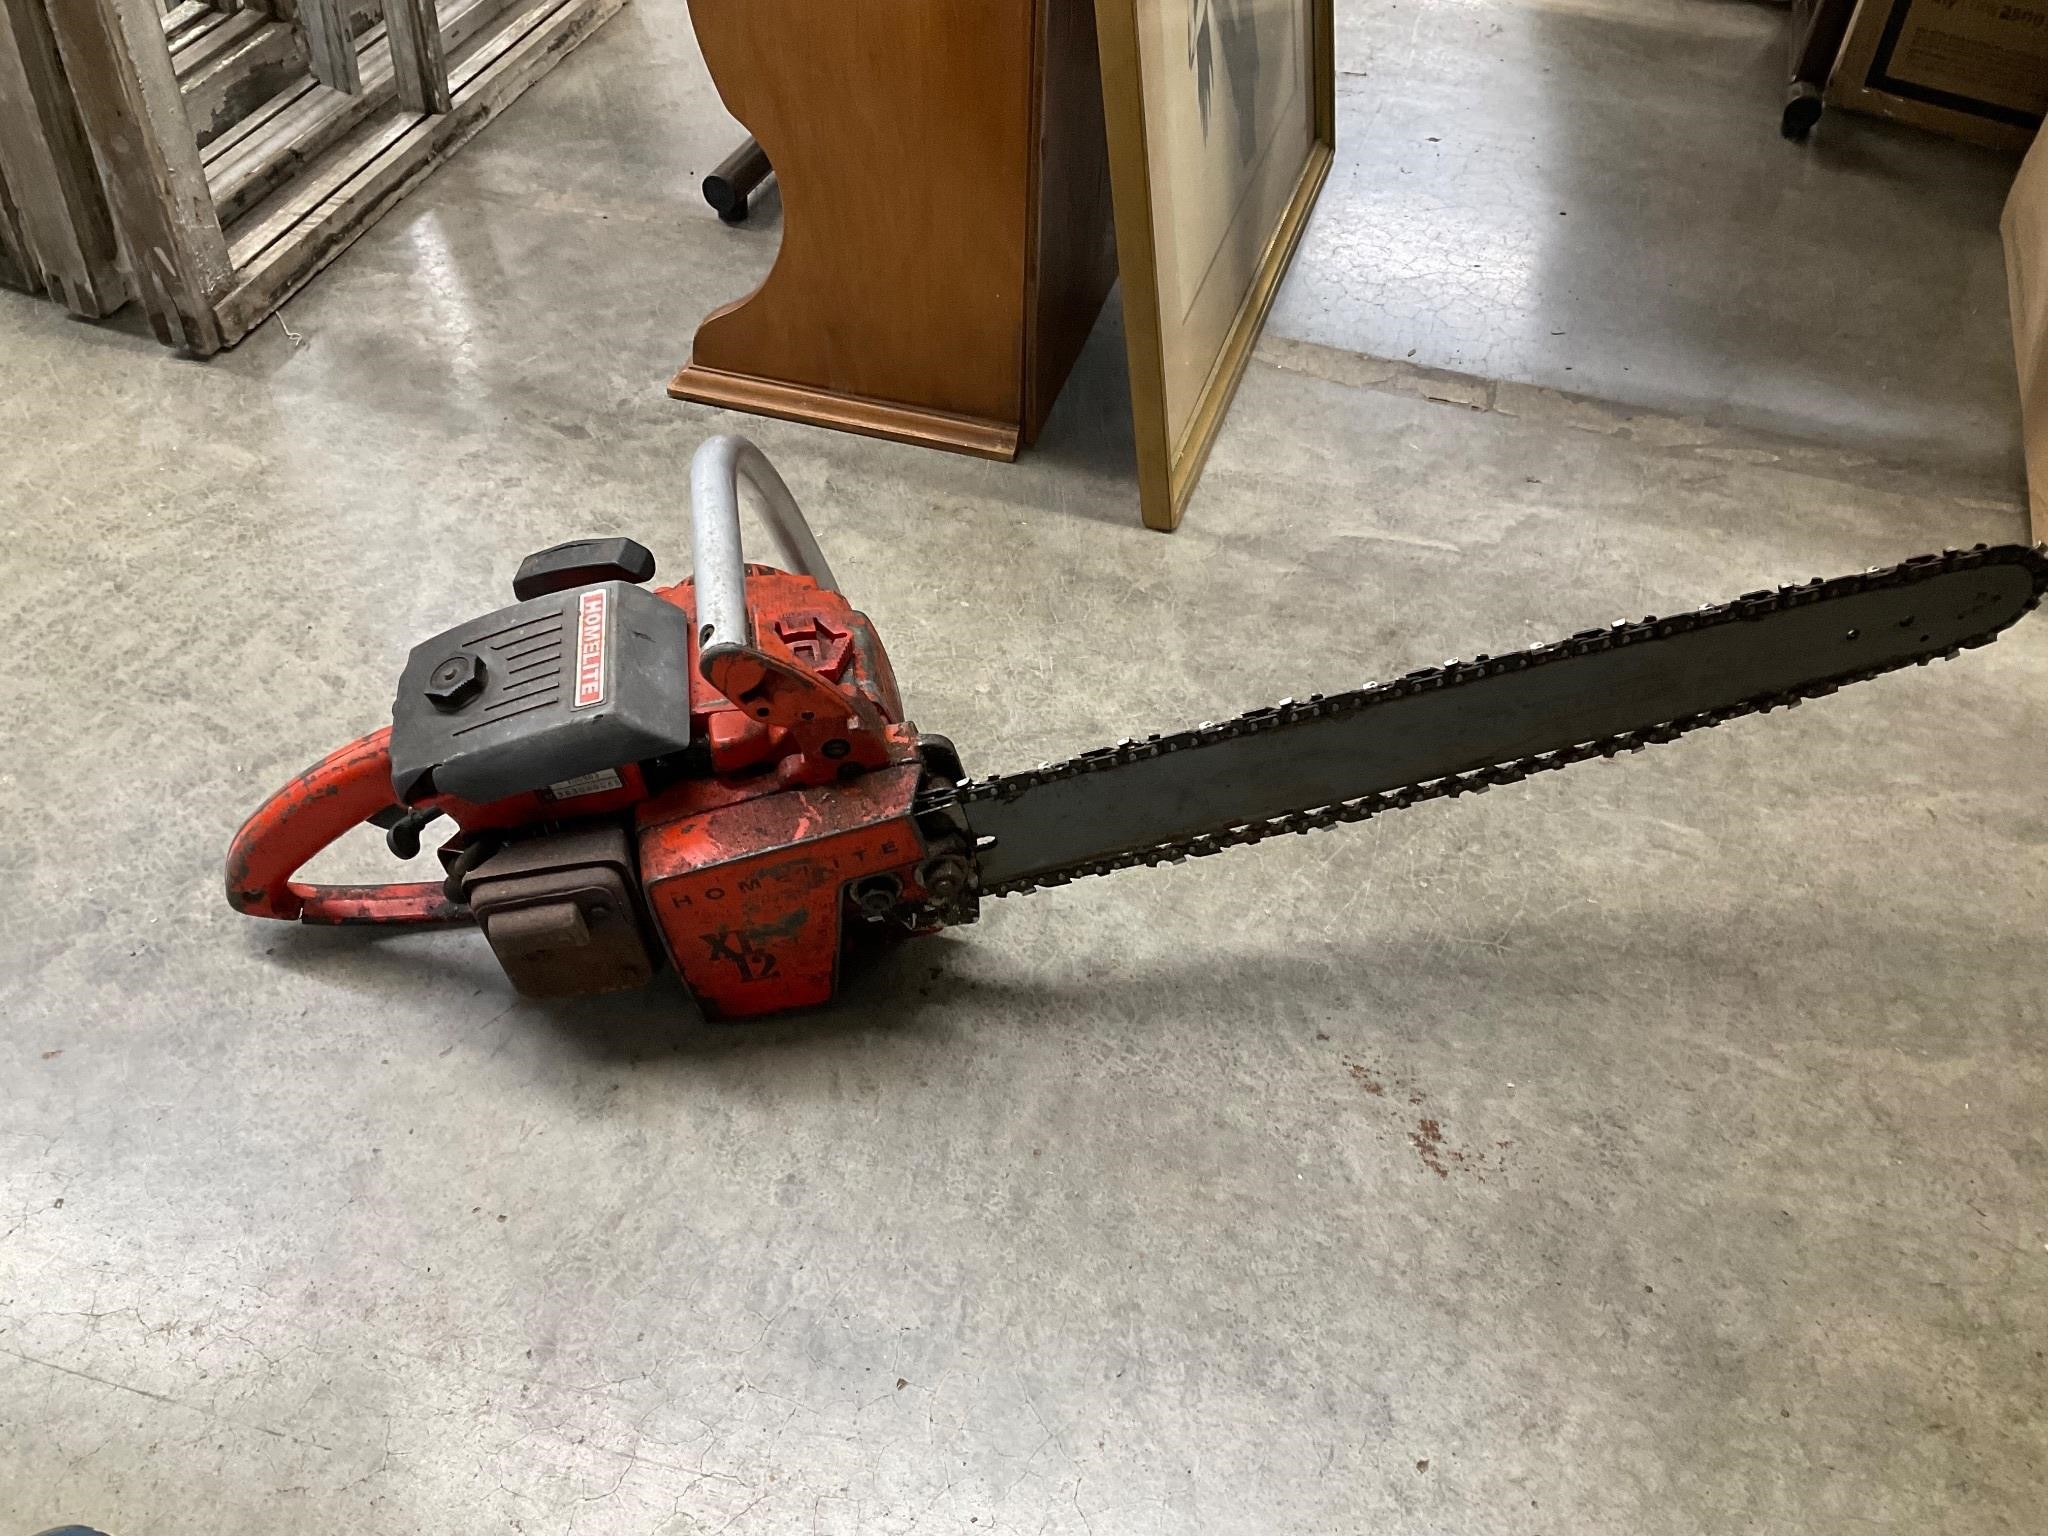 Homelite chain saw not lock up